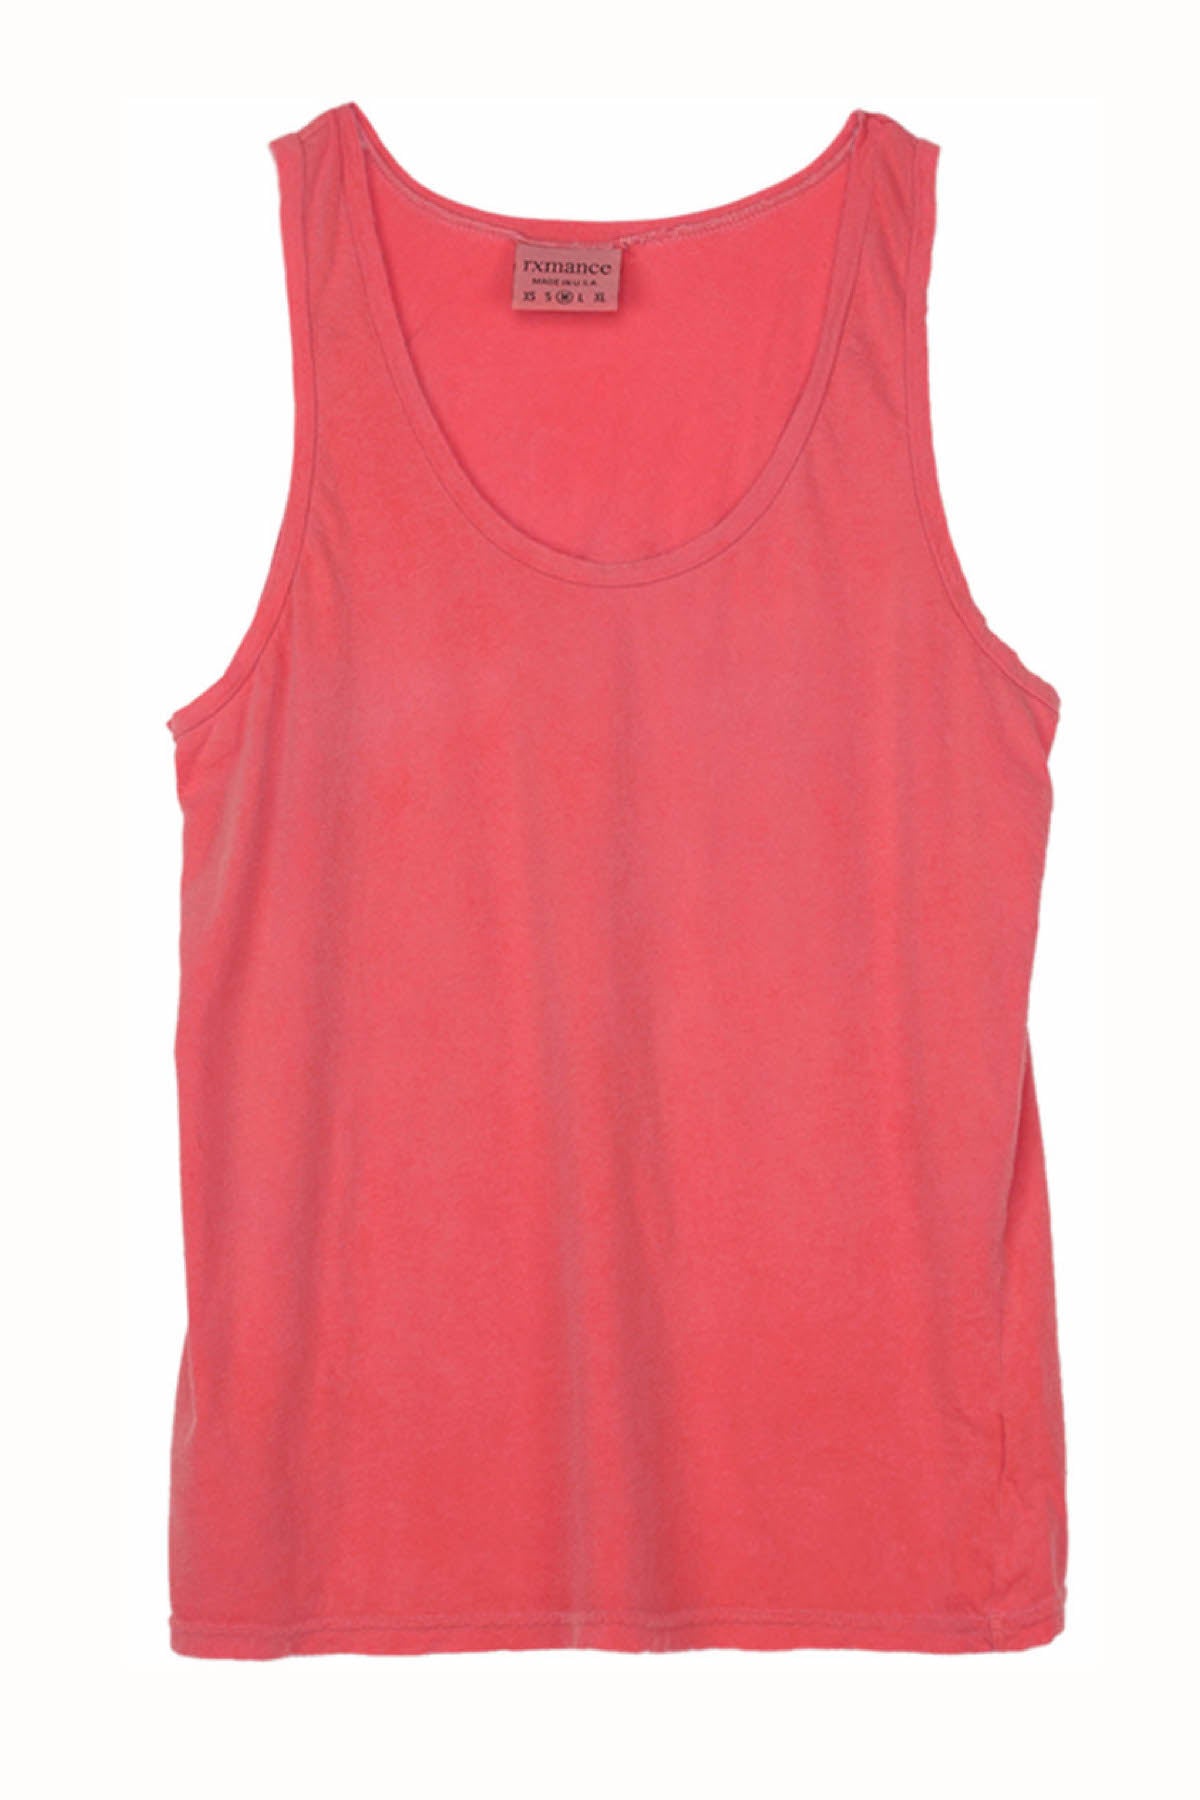 Rxmance Faded Red Tank Top